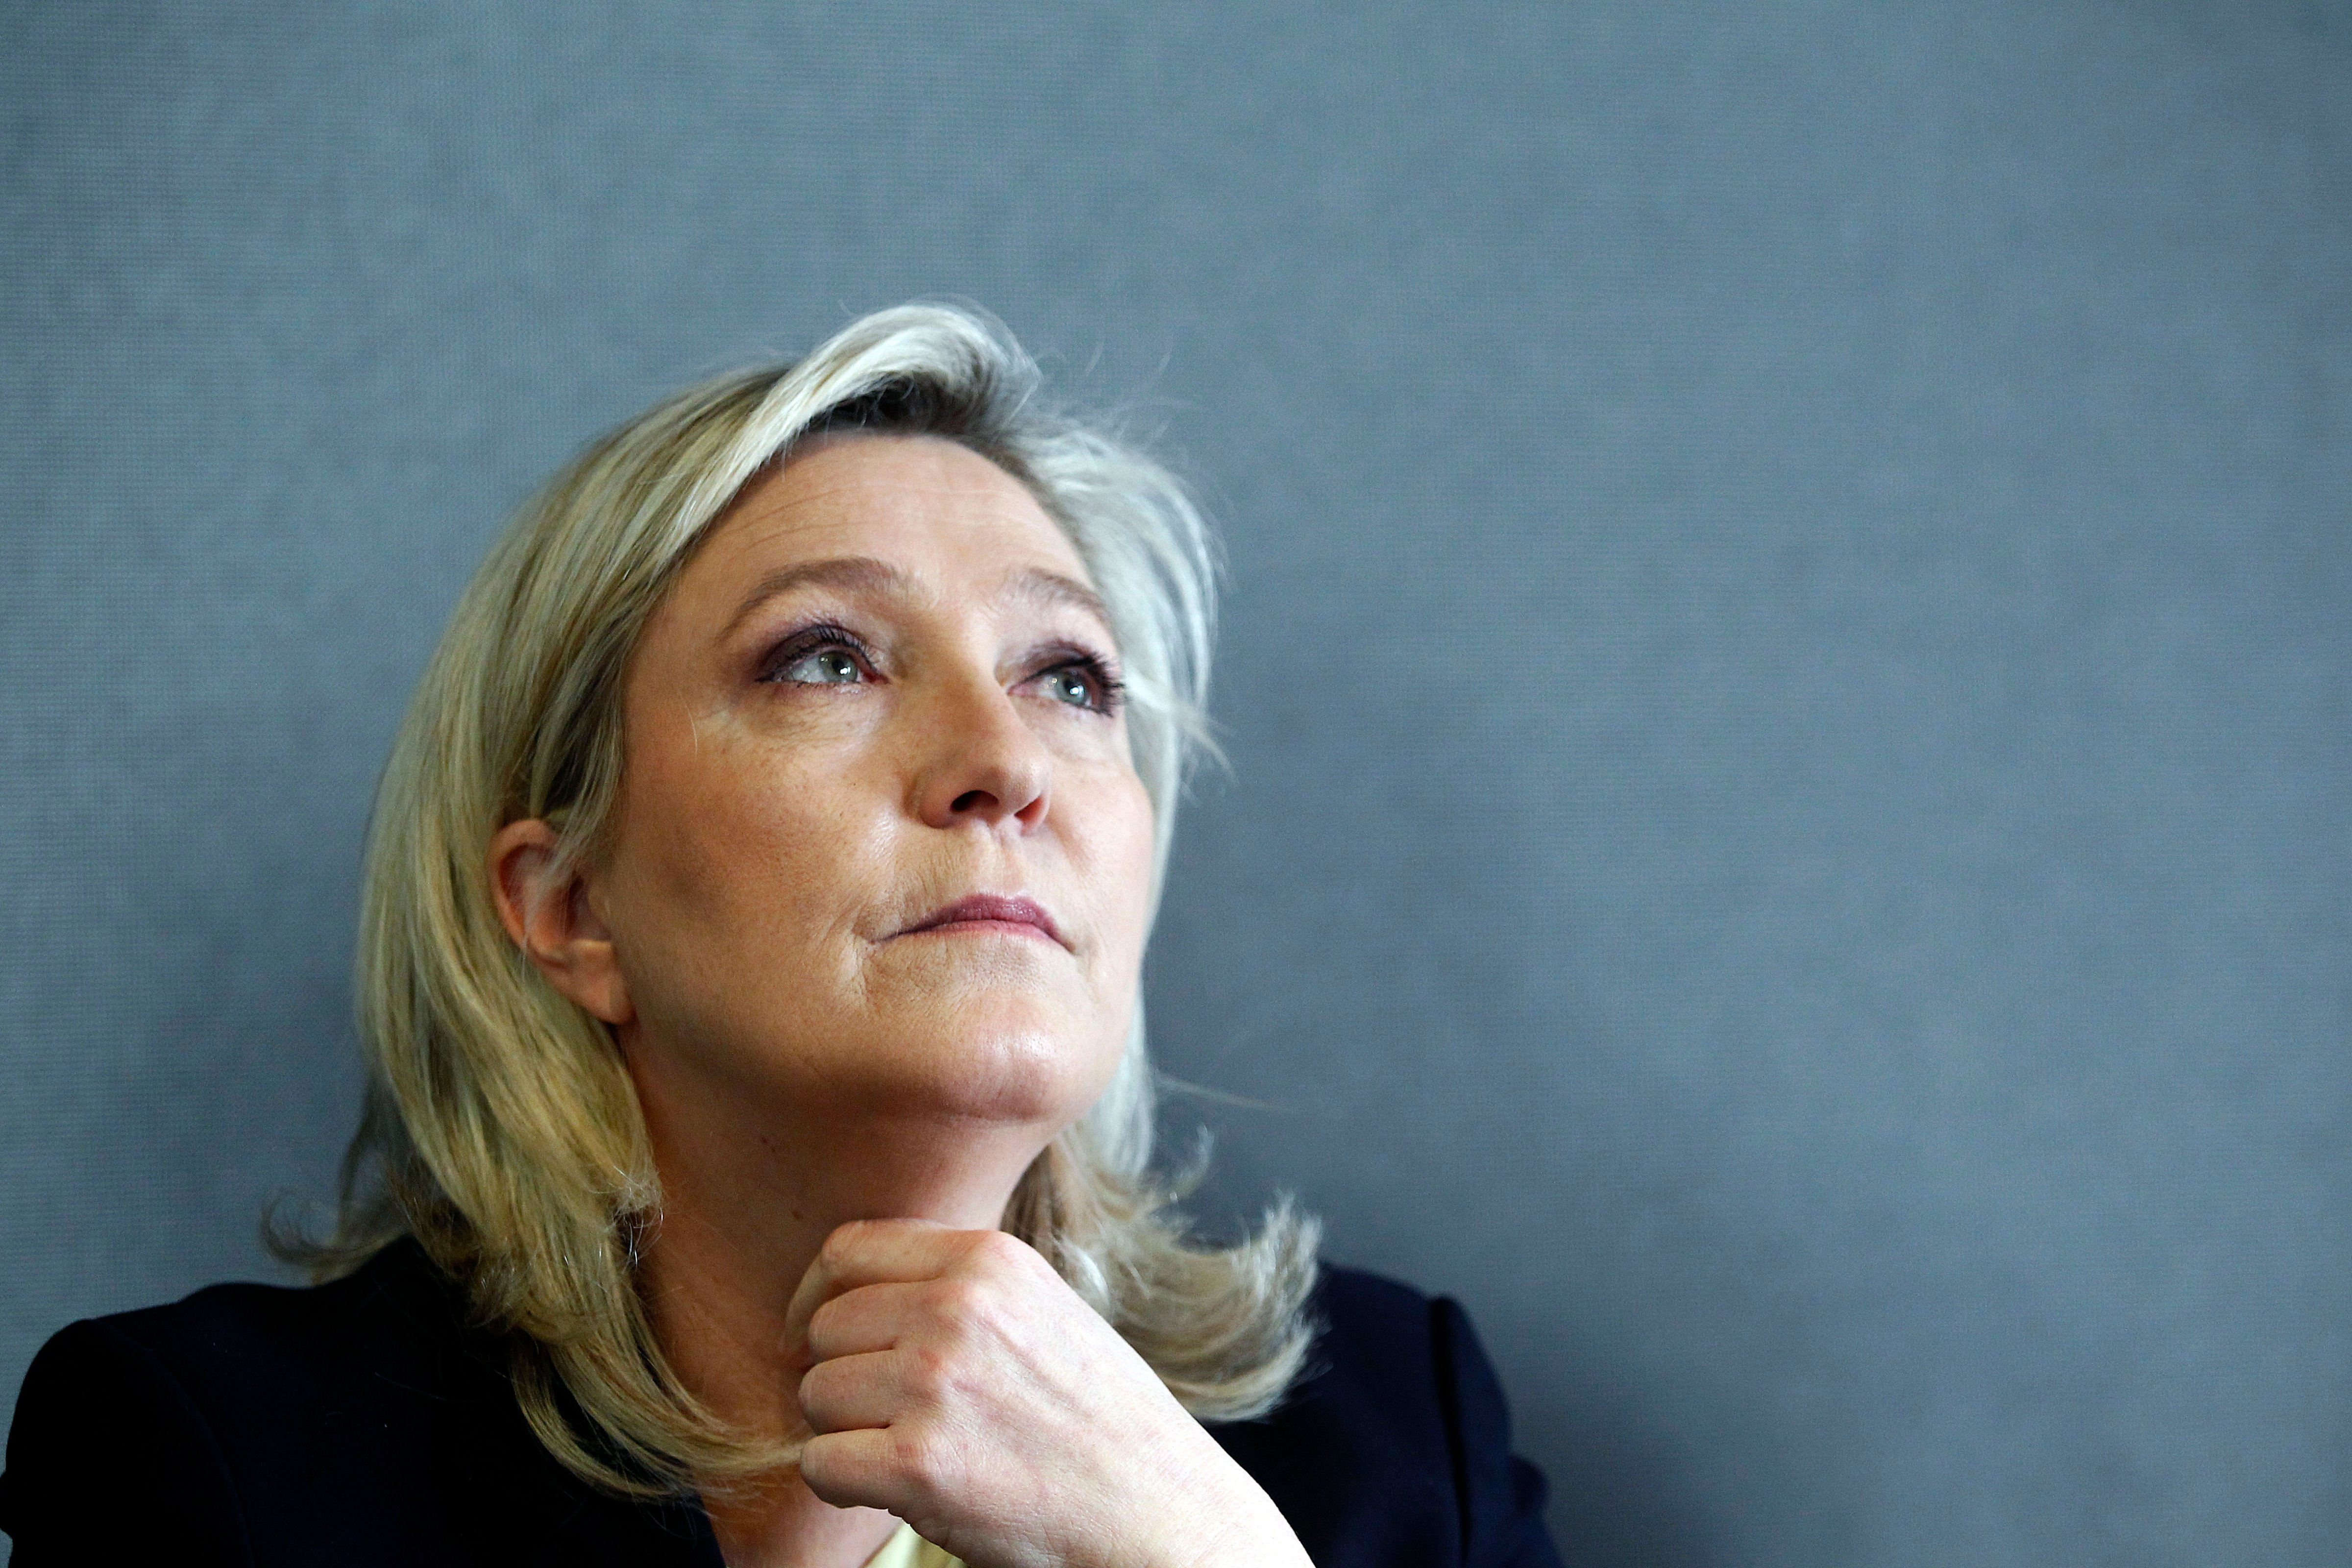 Marine Le Pen  attends a news conference on March 7, 2016 in Paris. (Chesnot—Getty Images)